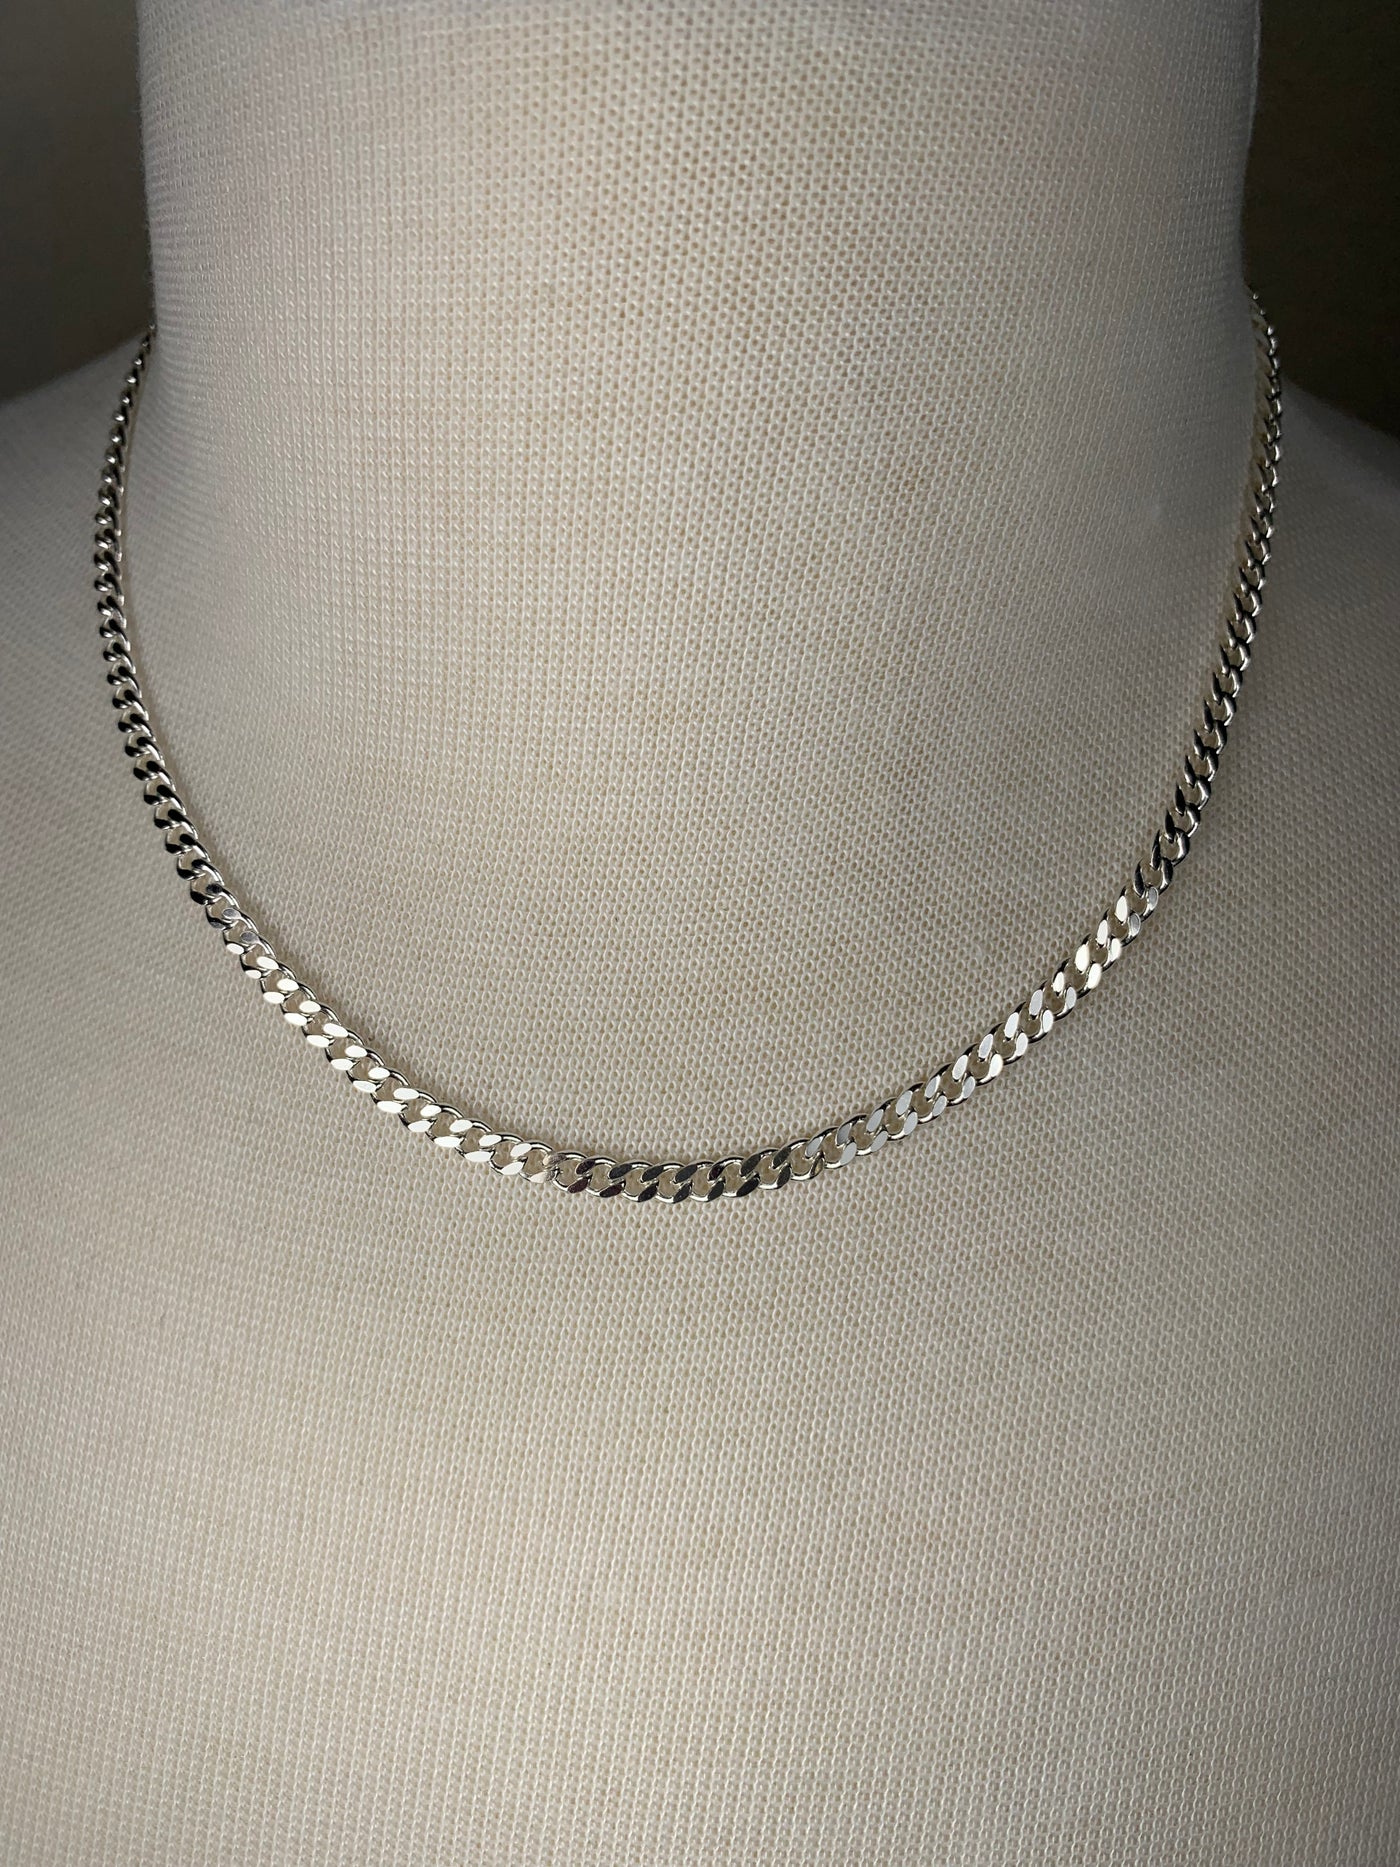 4mm Italian Curb Chain Necklace in Sterling Silver